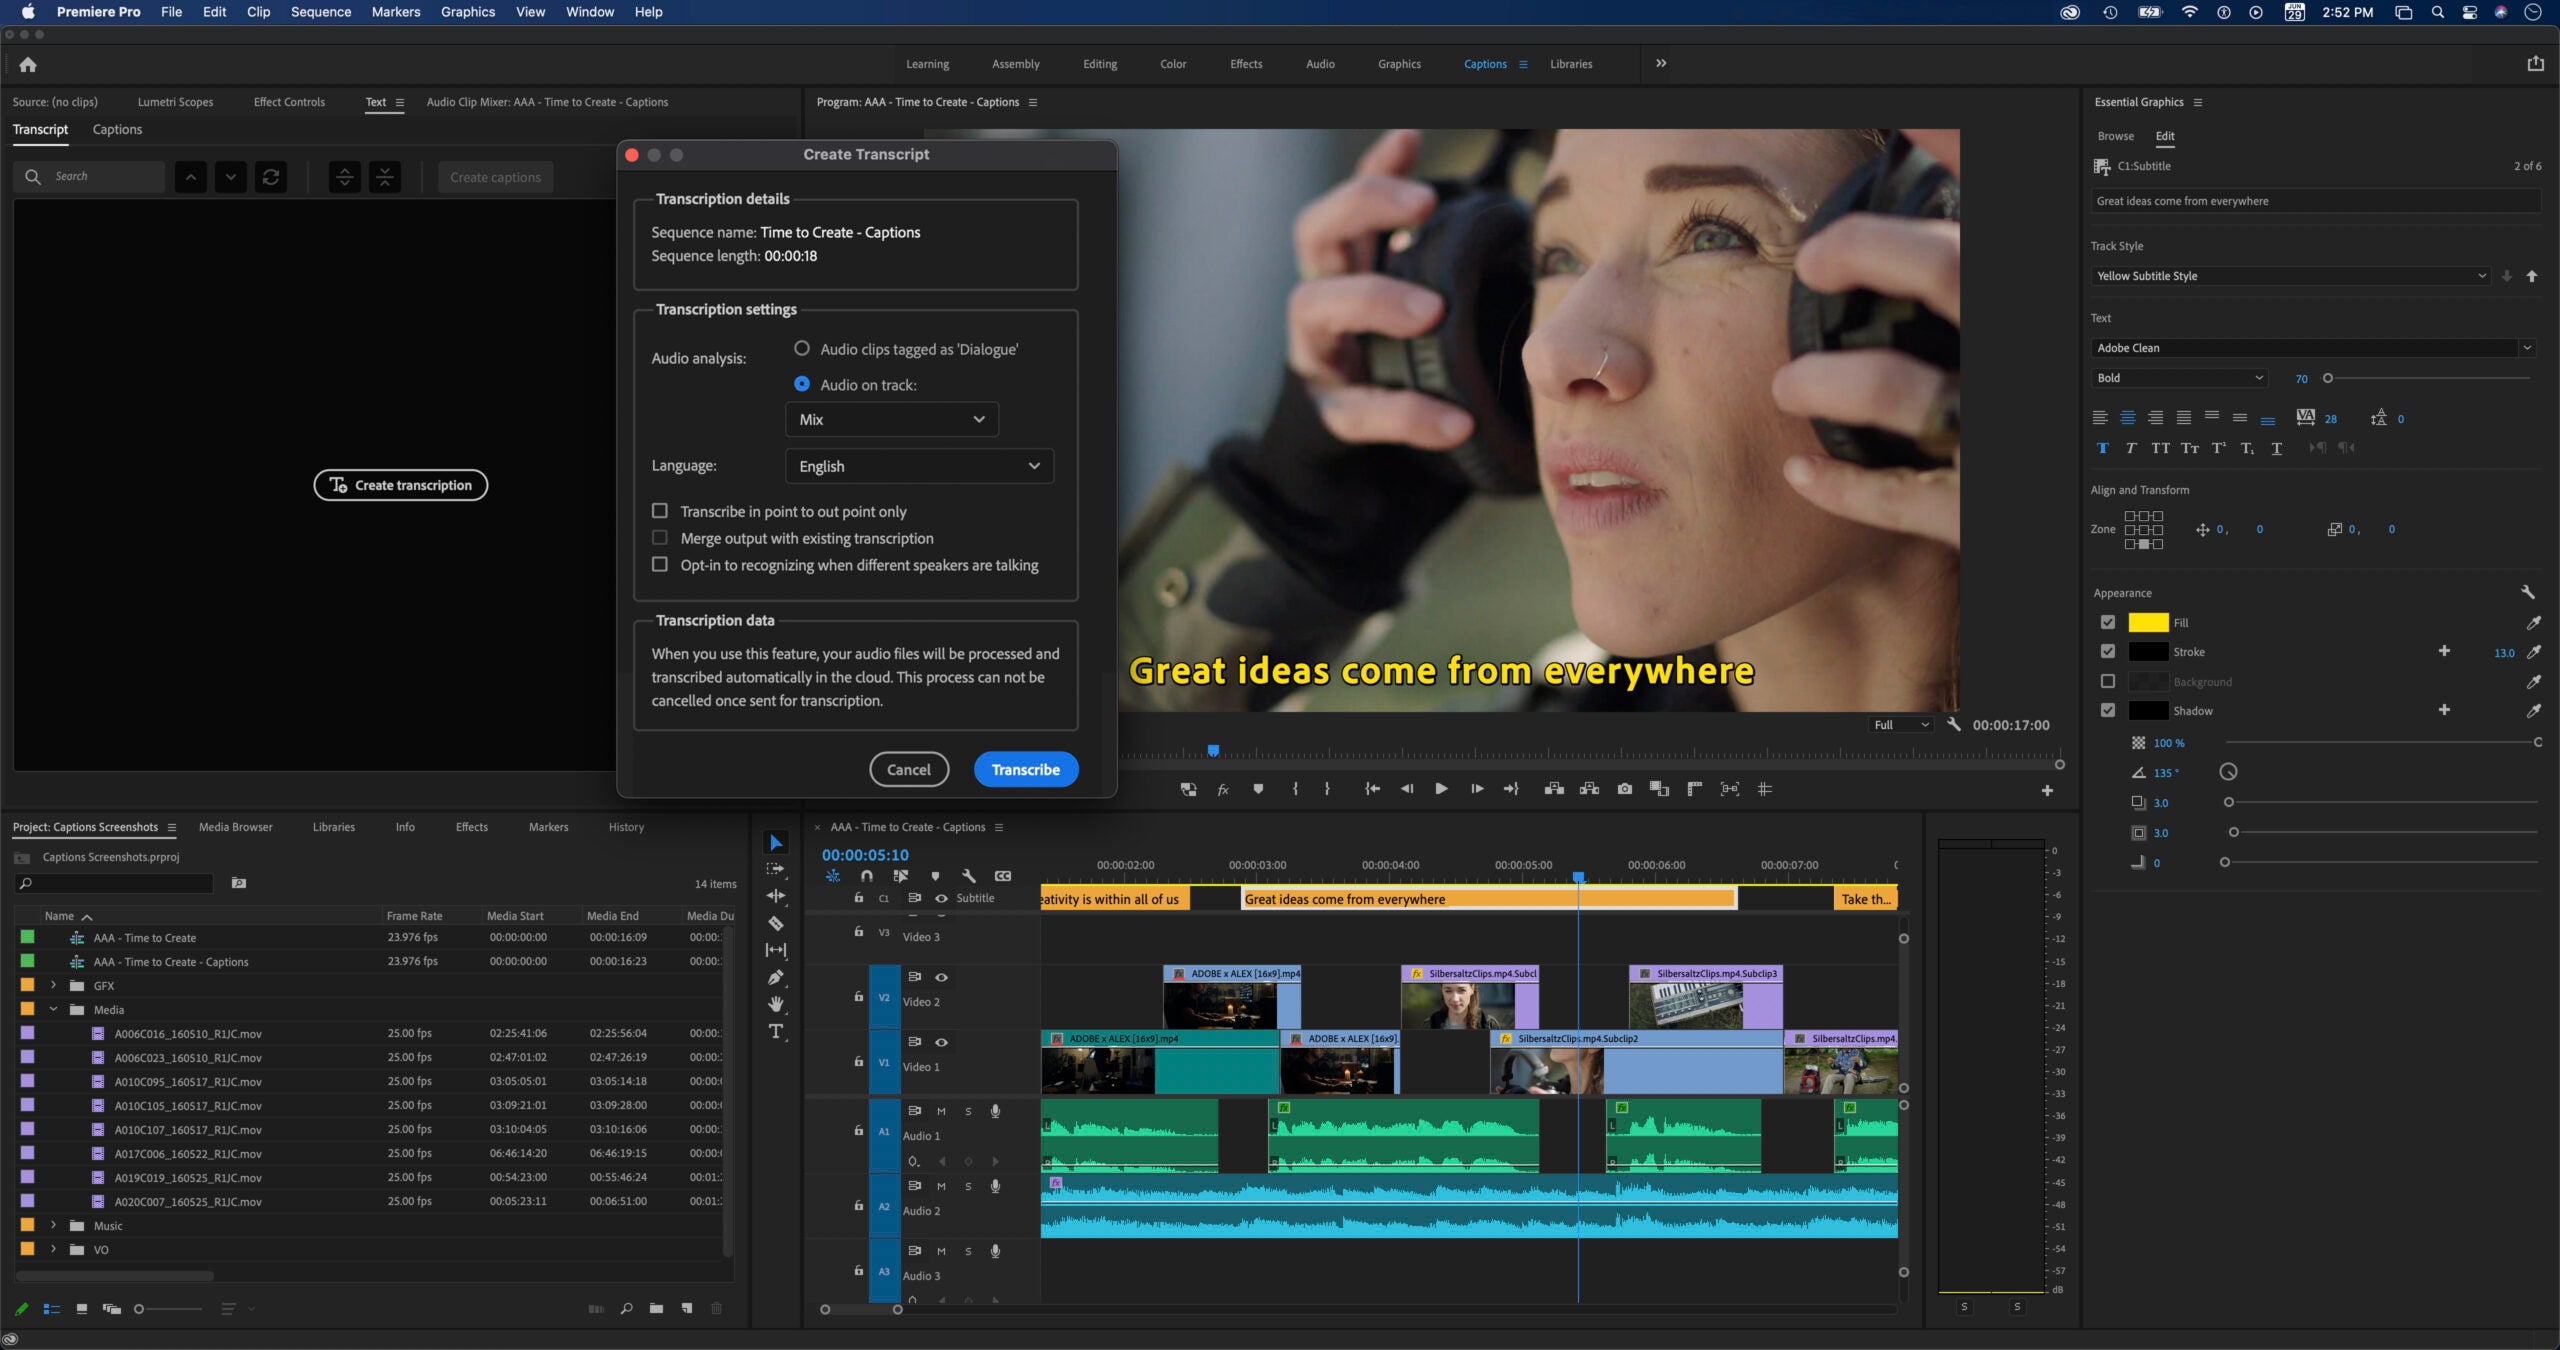 Adobe's Premiere Pro is “incredibly responsive” with Apple M1